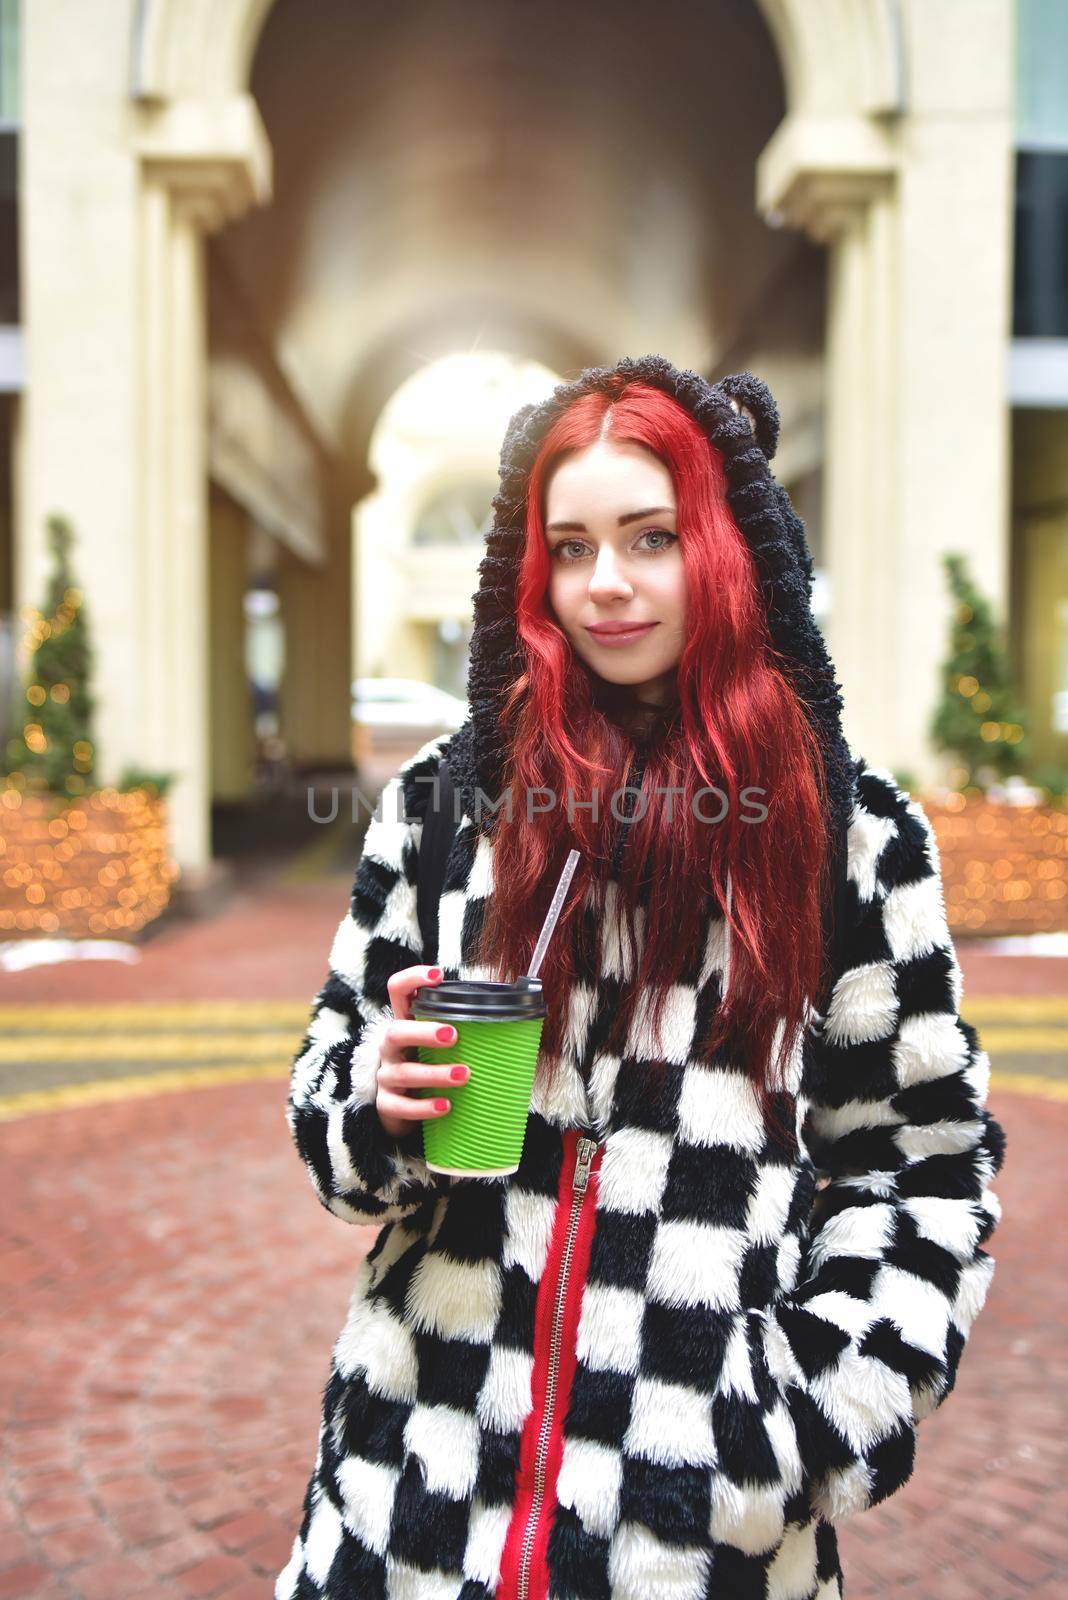 Near portrait of a teen girl with red hair in warm clothes standing outside on a cold day with a cup of coffee in her hands and looks into the camera. Cute girl walking with coffee in her hands.